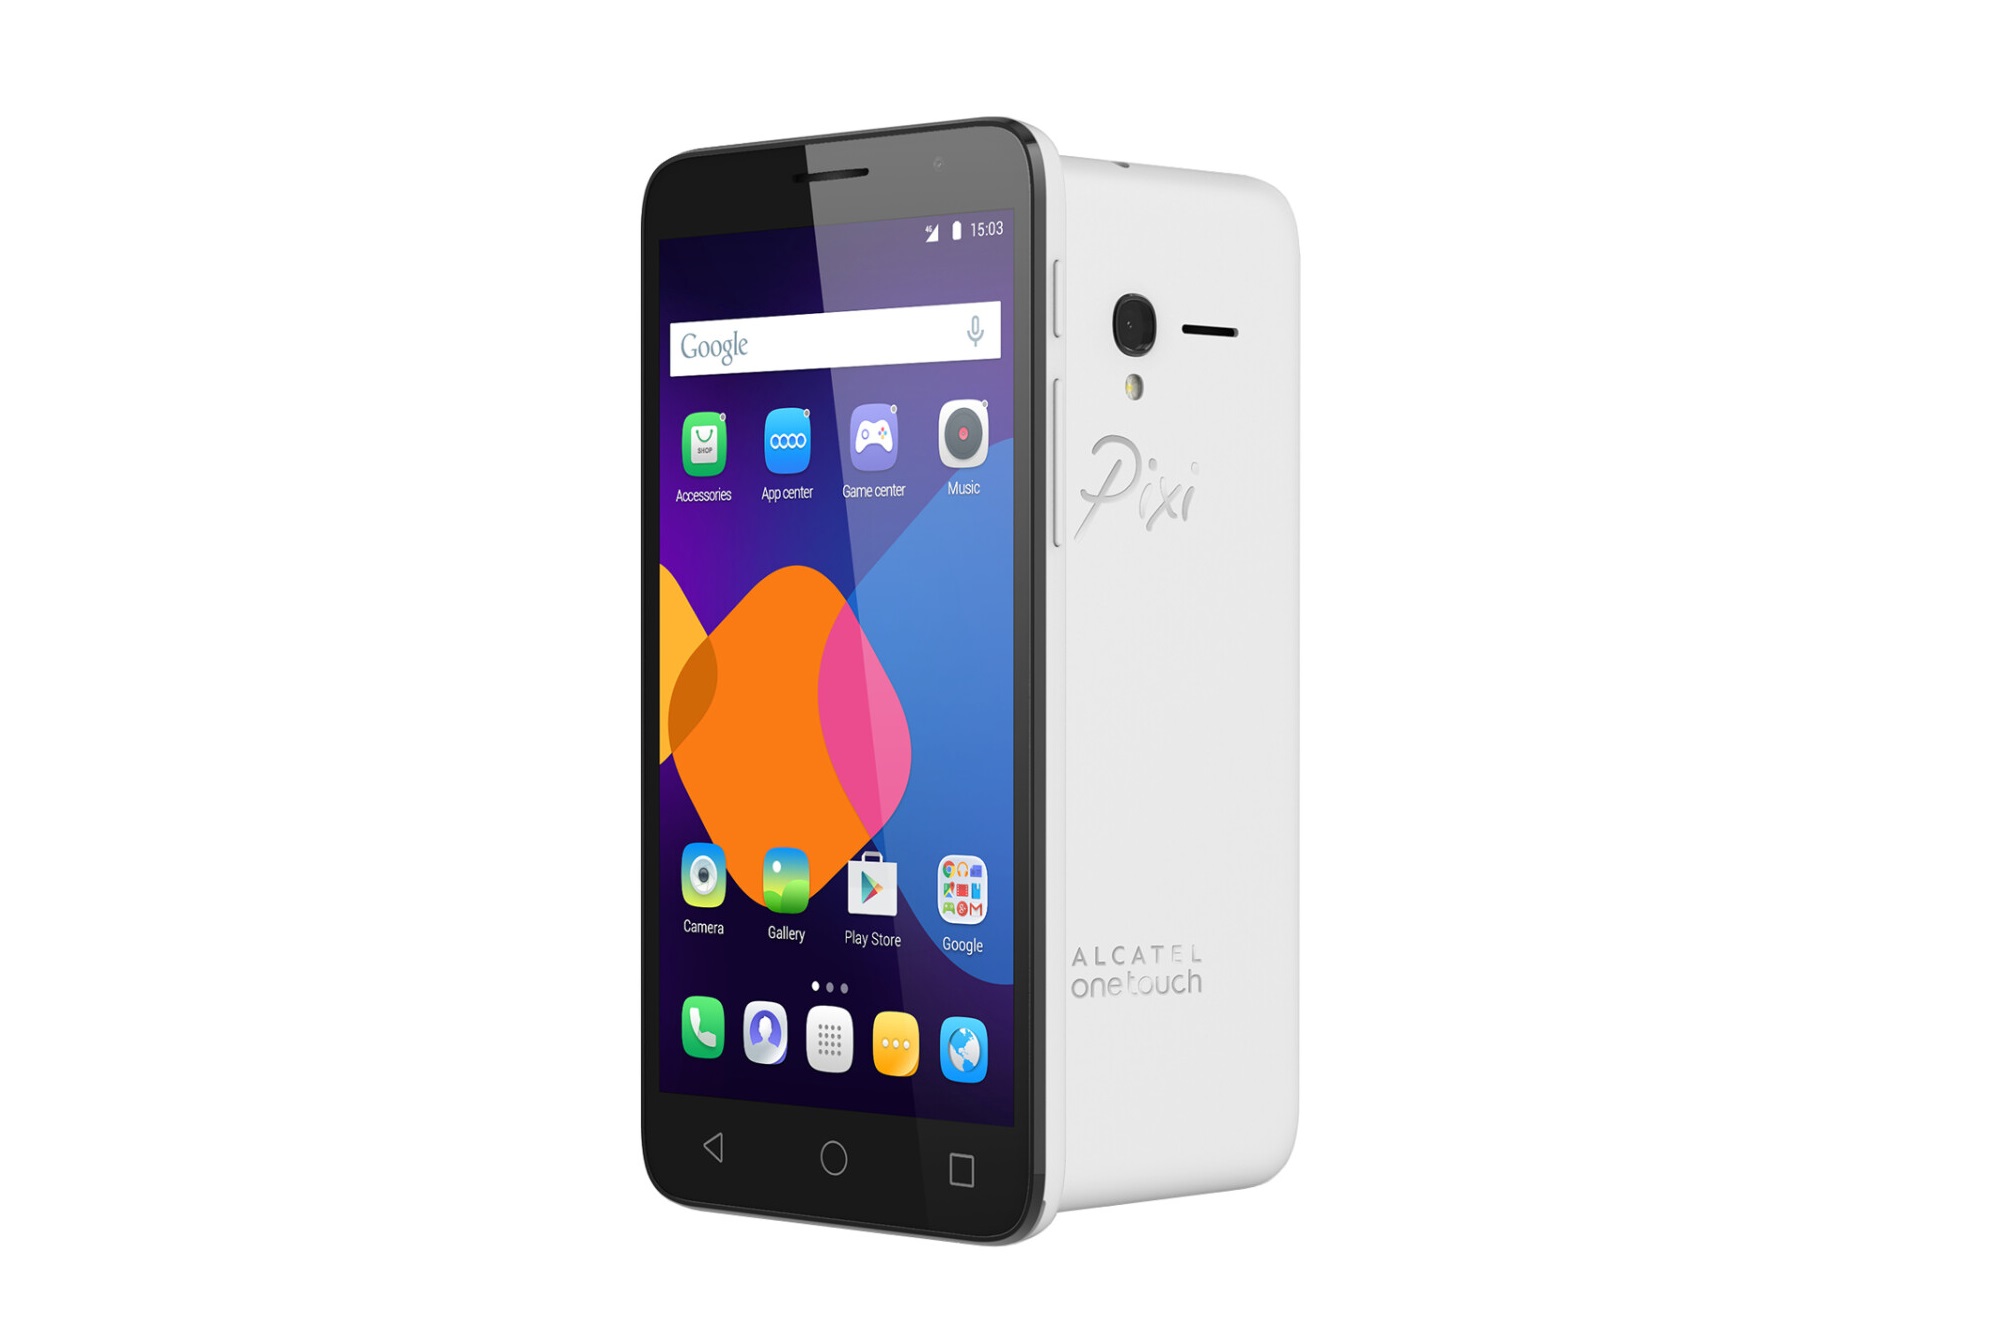 How to boot into safe mode on Alcatel Pixi 3 (5.5